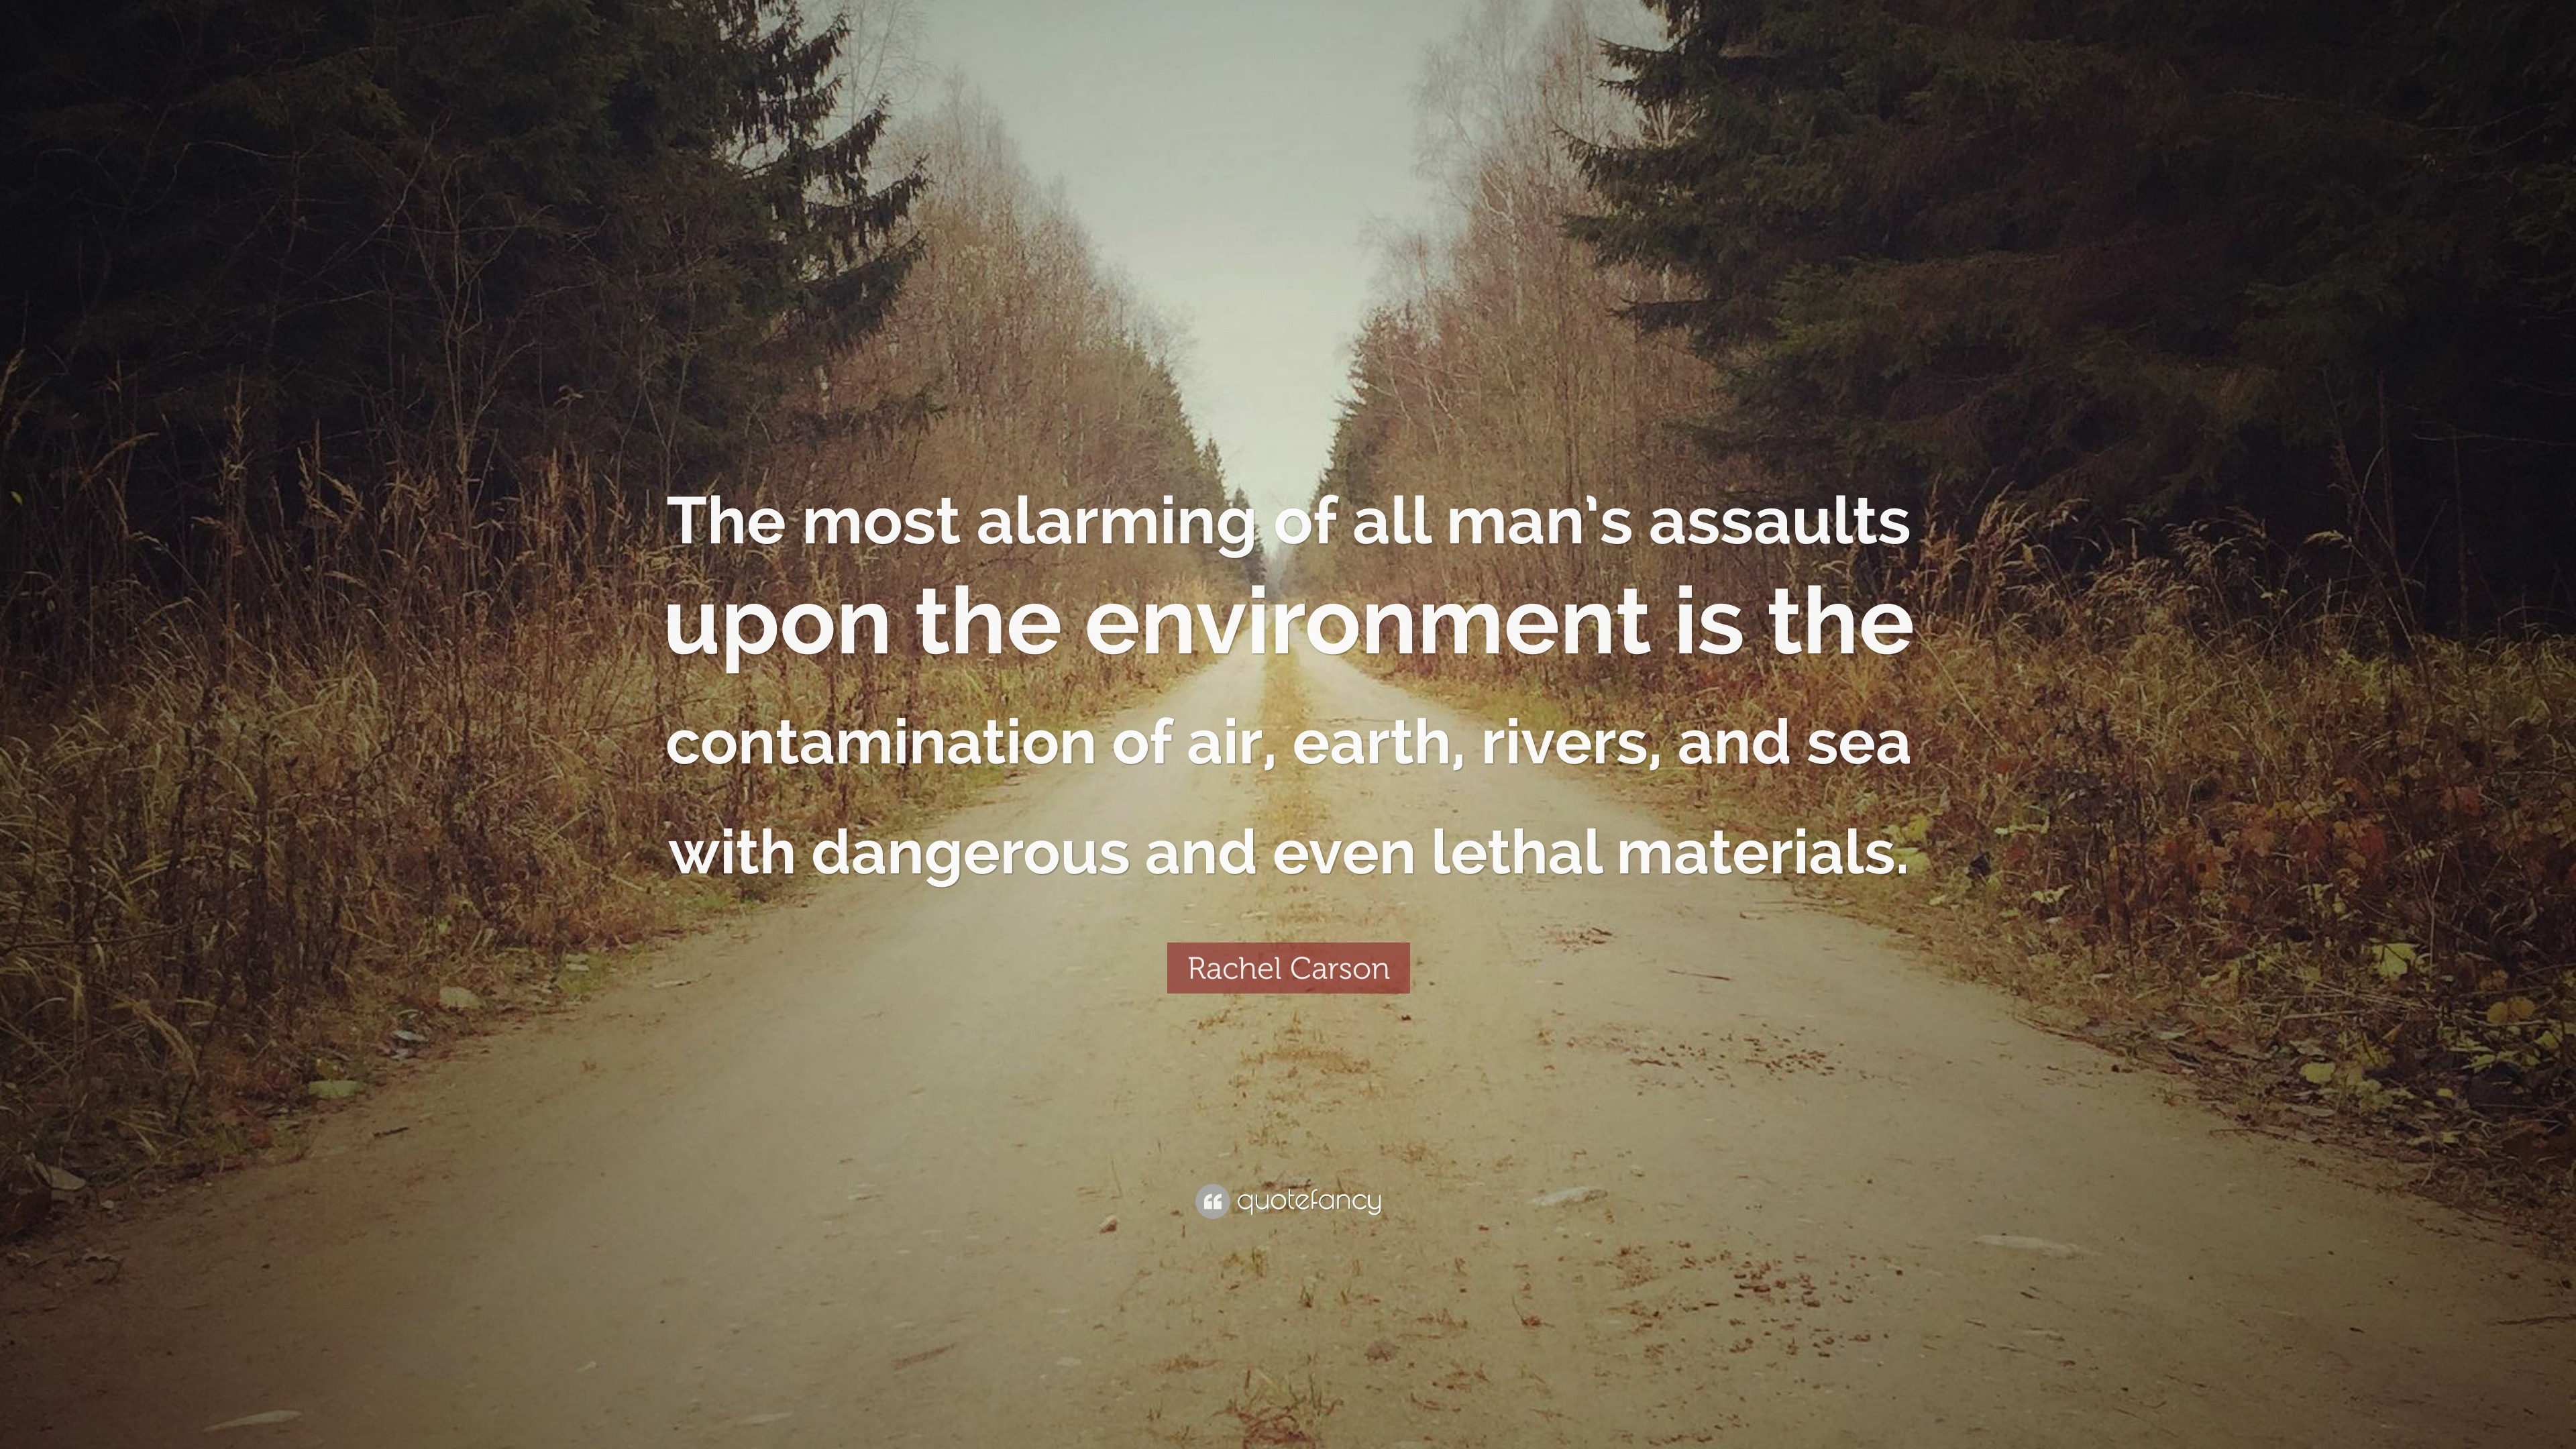 Rachel Carson Quote: “The most alarming of all man’s assaults upon the